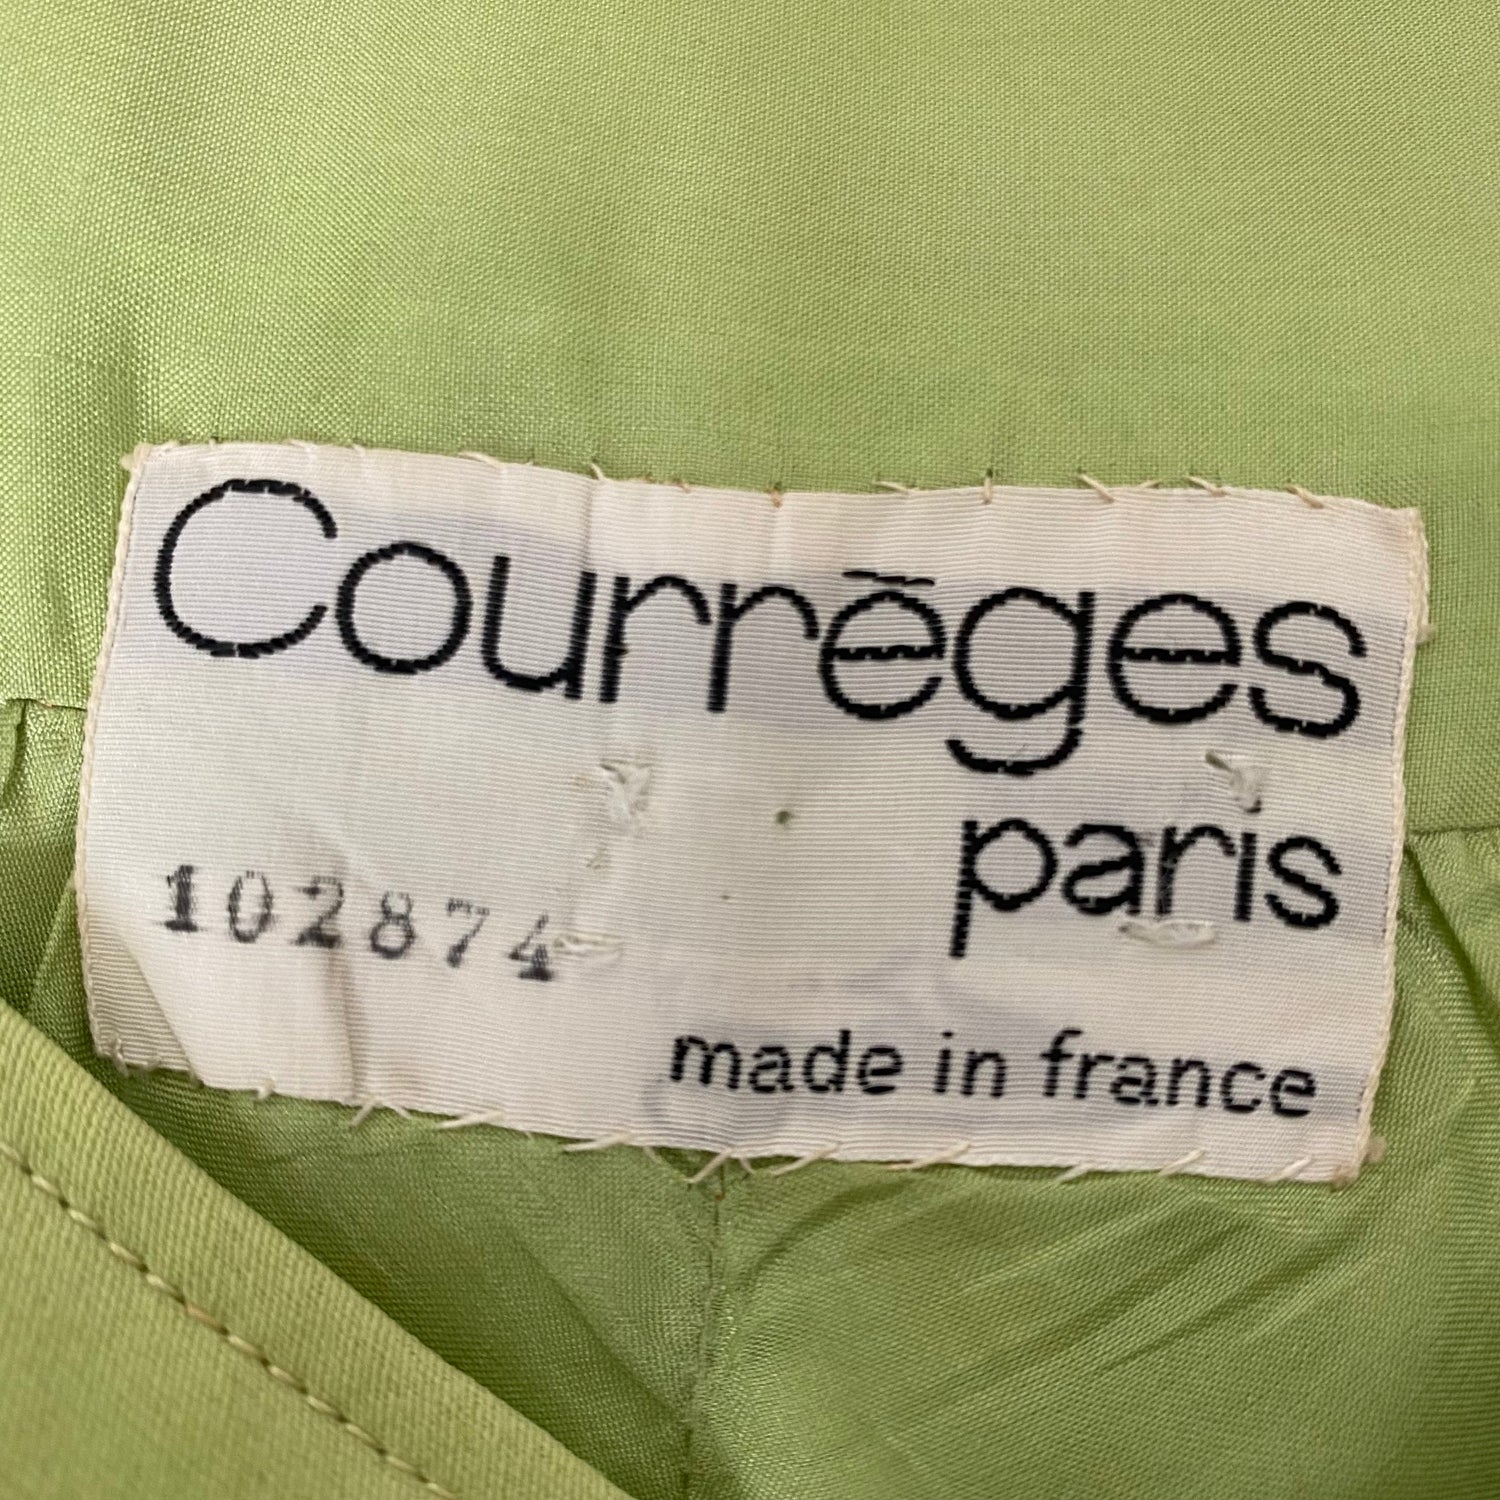 Lysis vintage Courrèges zipped dress in anise green cotton - S - 1980